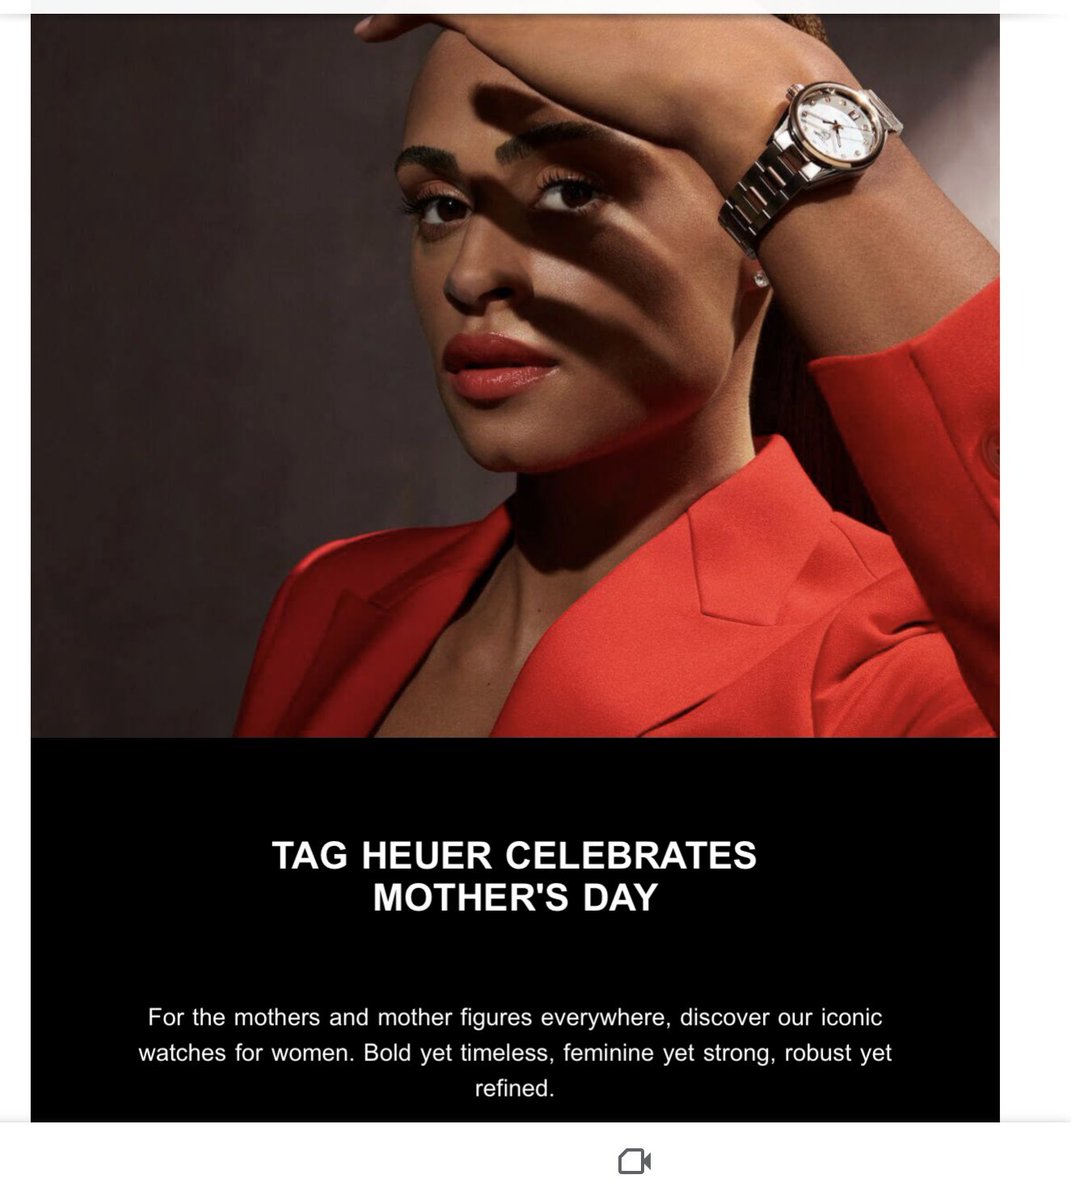 This is the new ad from Tag that I received in my inbox today. Mothers and Mother figures. When will the abuse of actual women and mothers end?